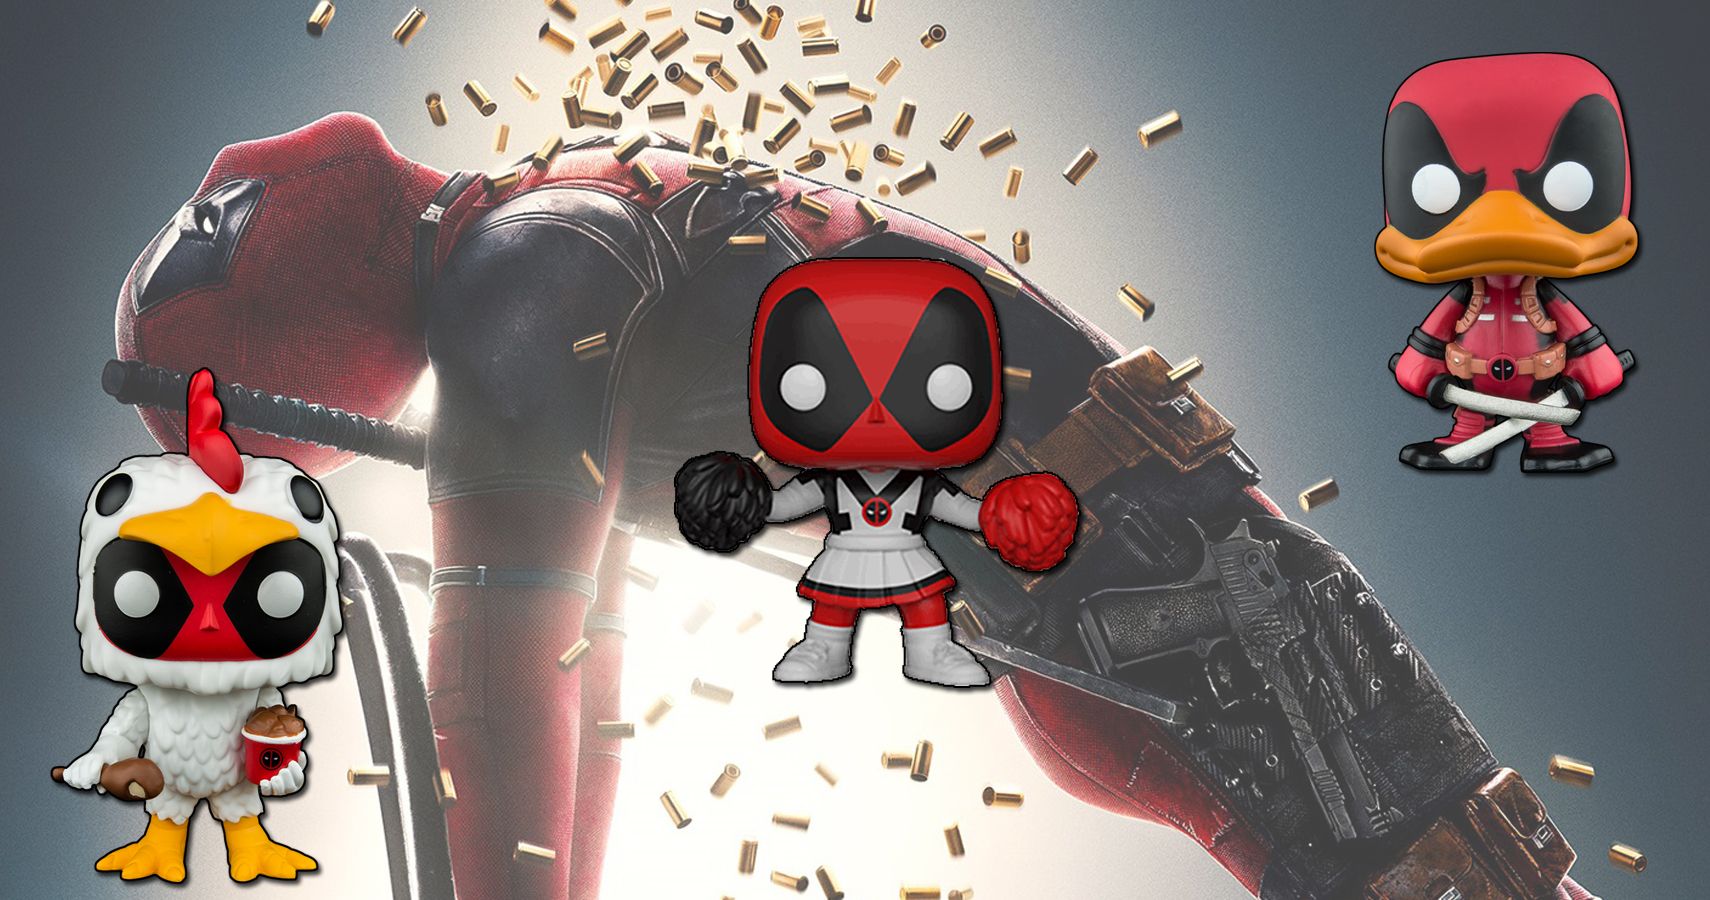 Funko's 'Deadpool 2' Pop Figure Lineup is Everything We Hoped It Would Be